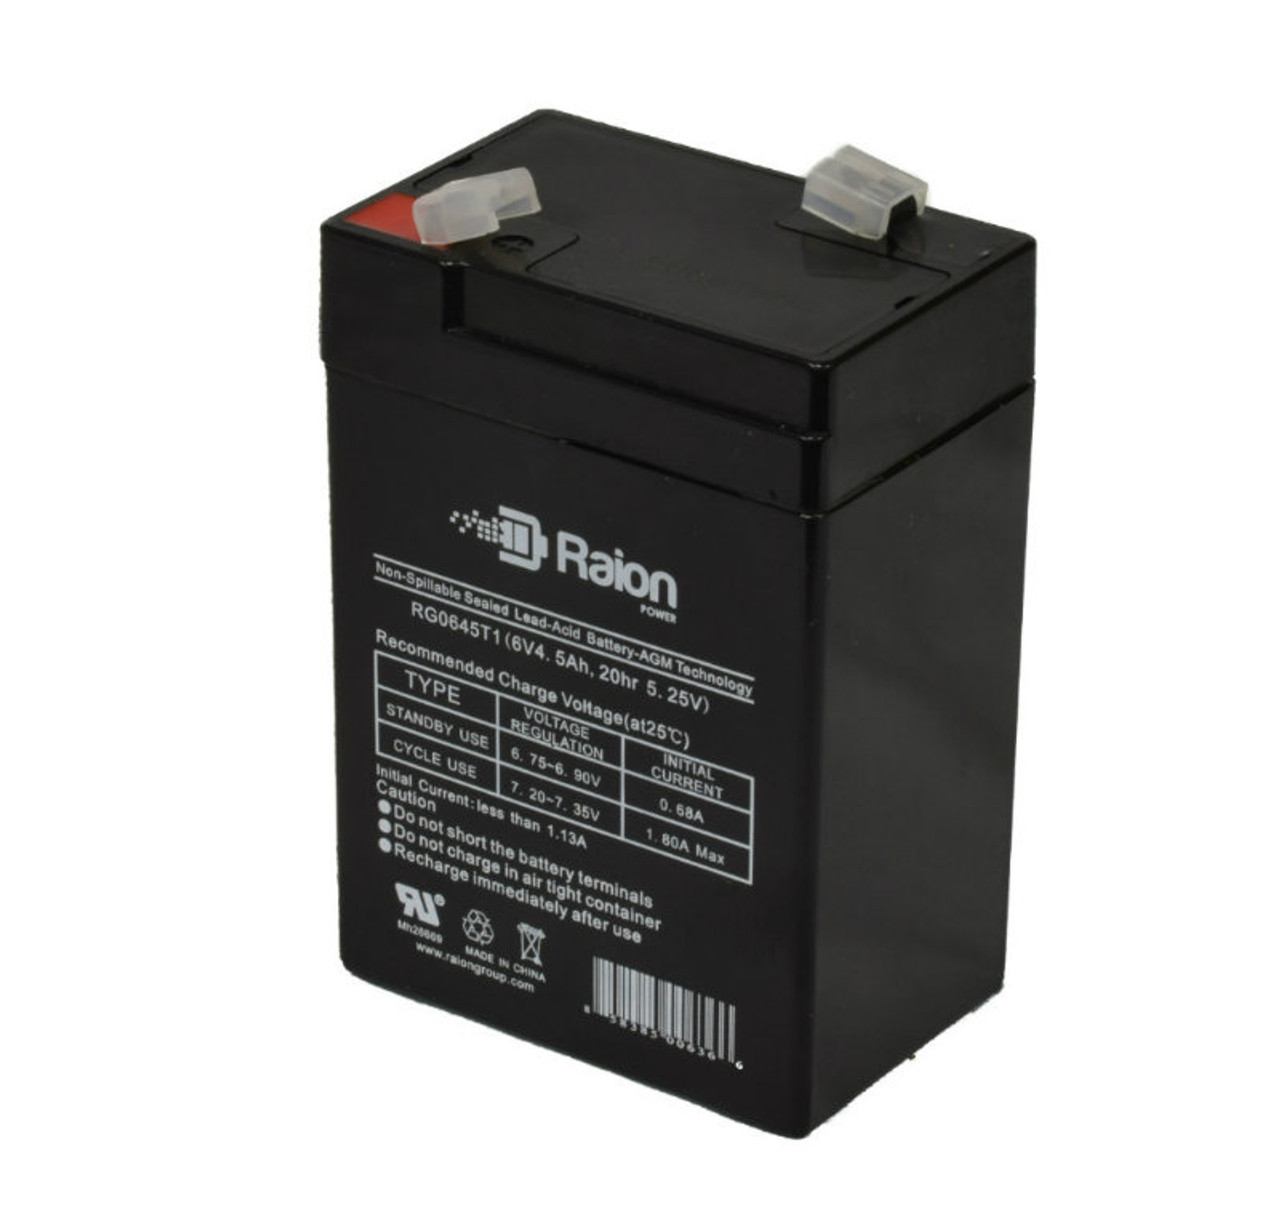 Raion Power RG0645T1 6V 4.5Ah Replacement Battery Cartridge for ExpertPower EXP645